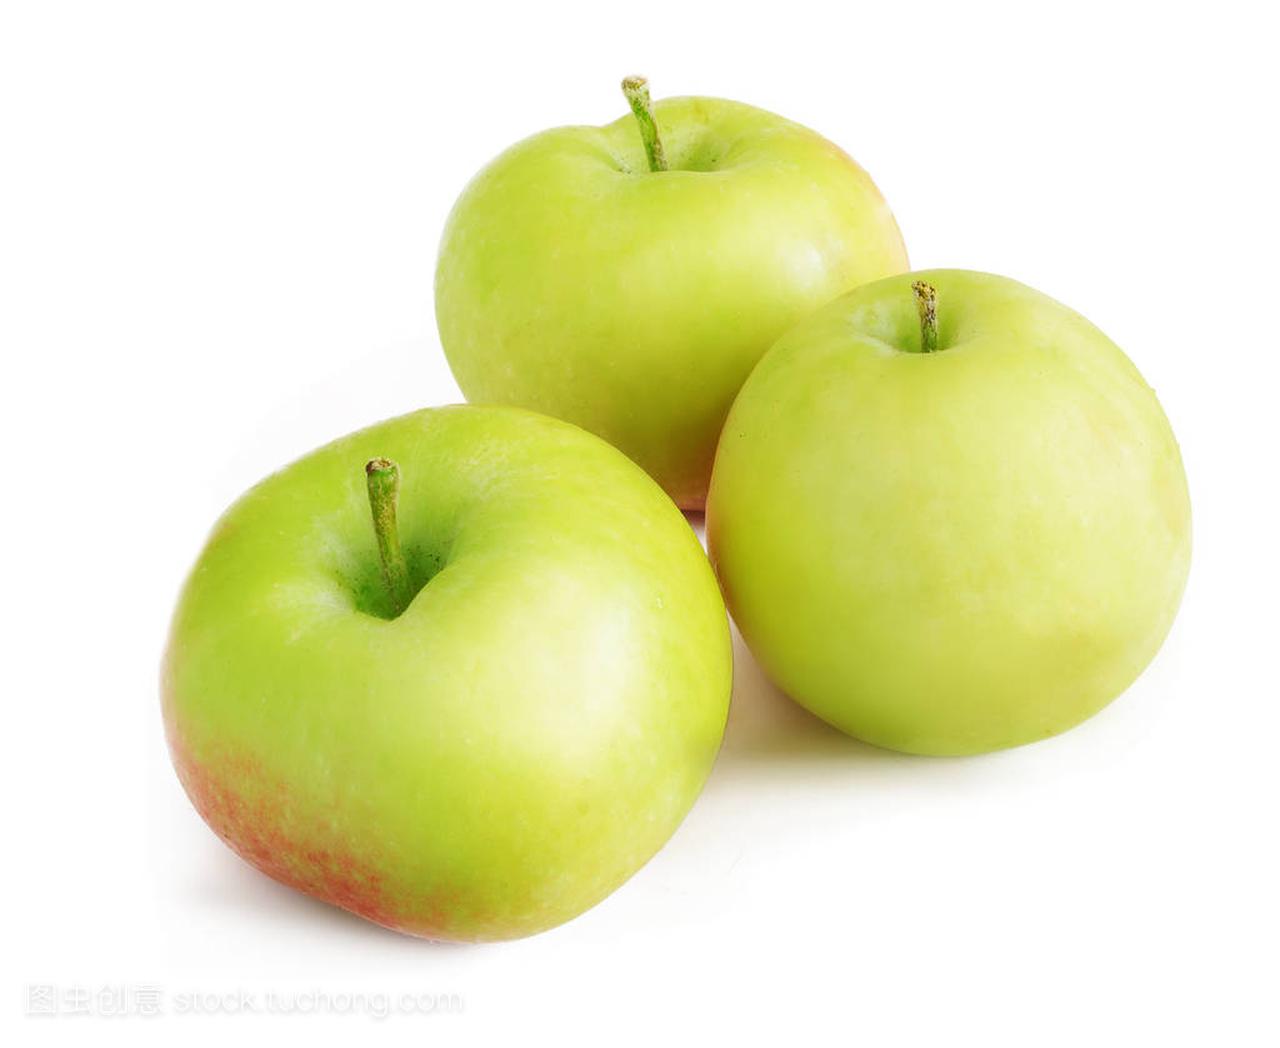 Green apples on a white background with a sha